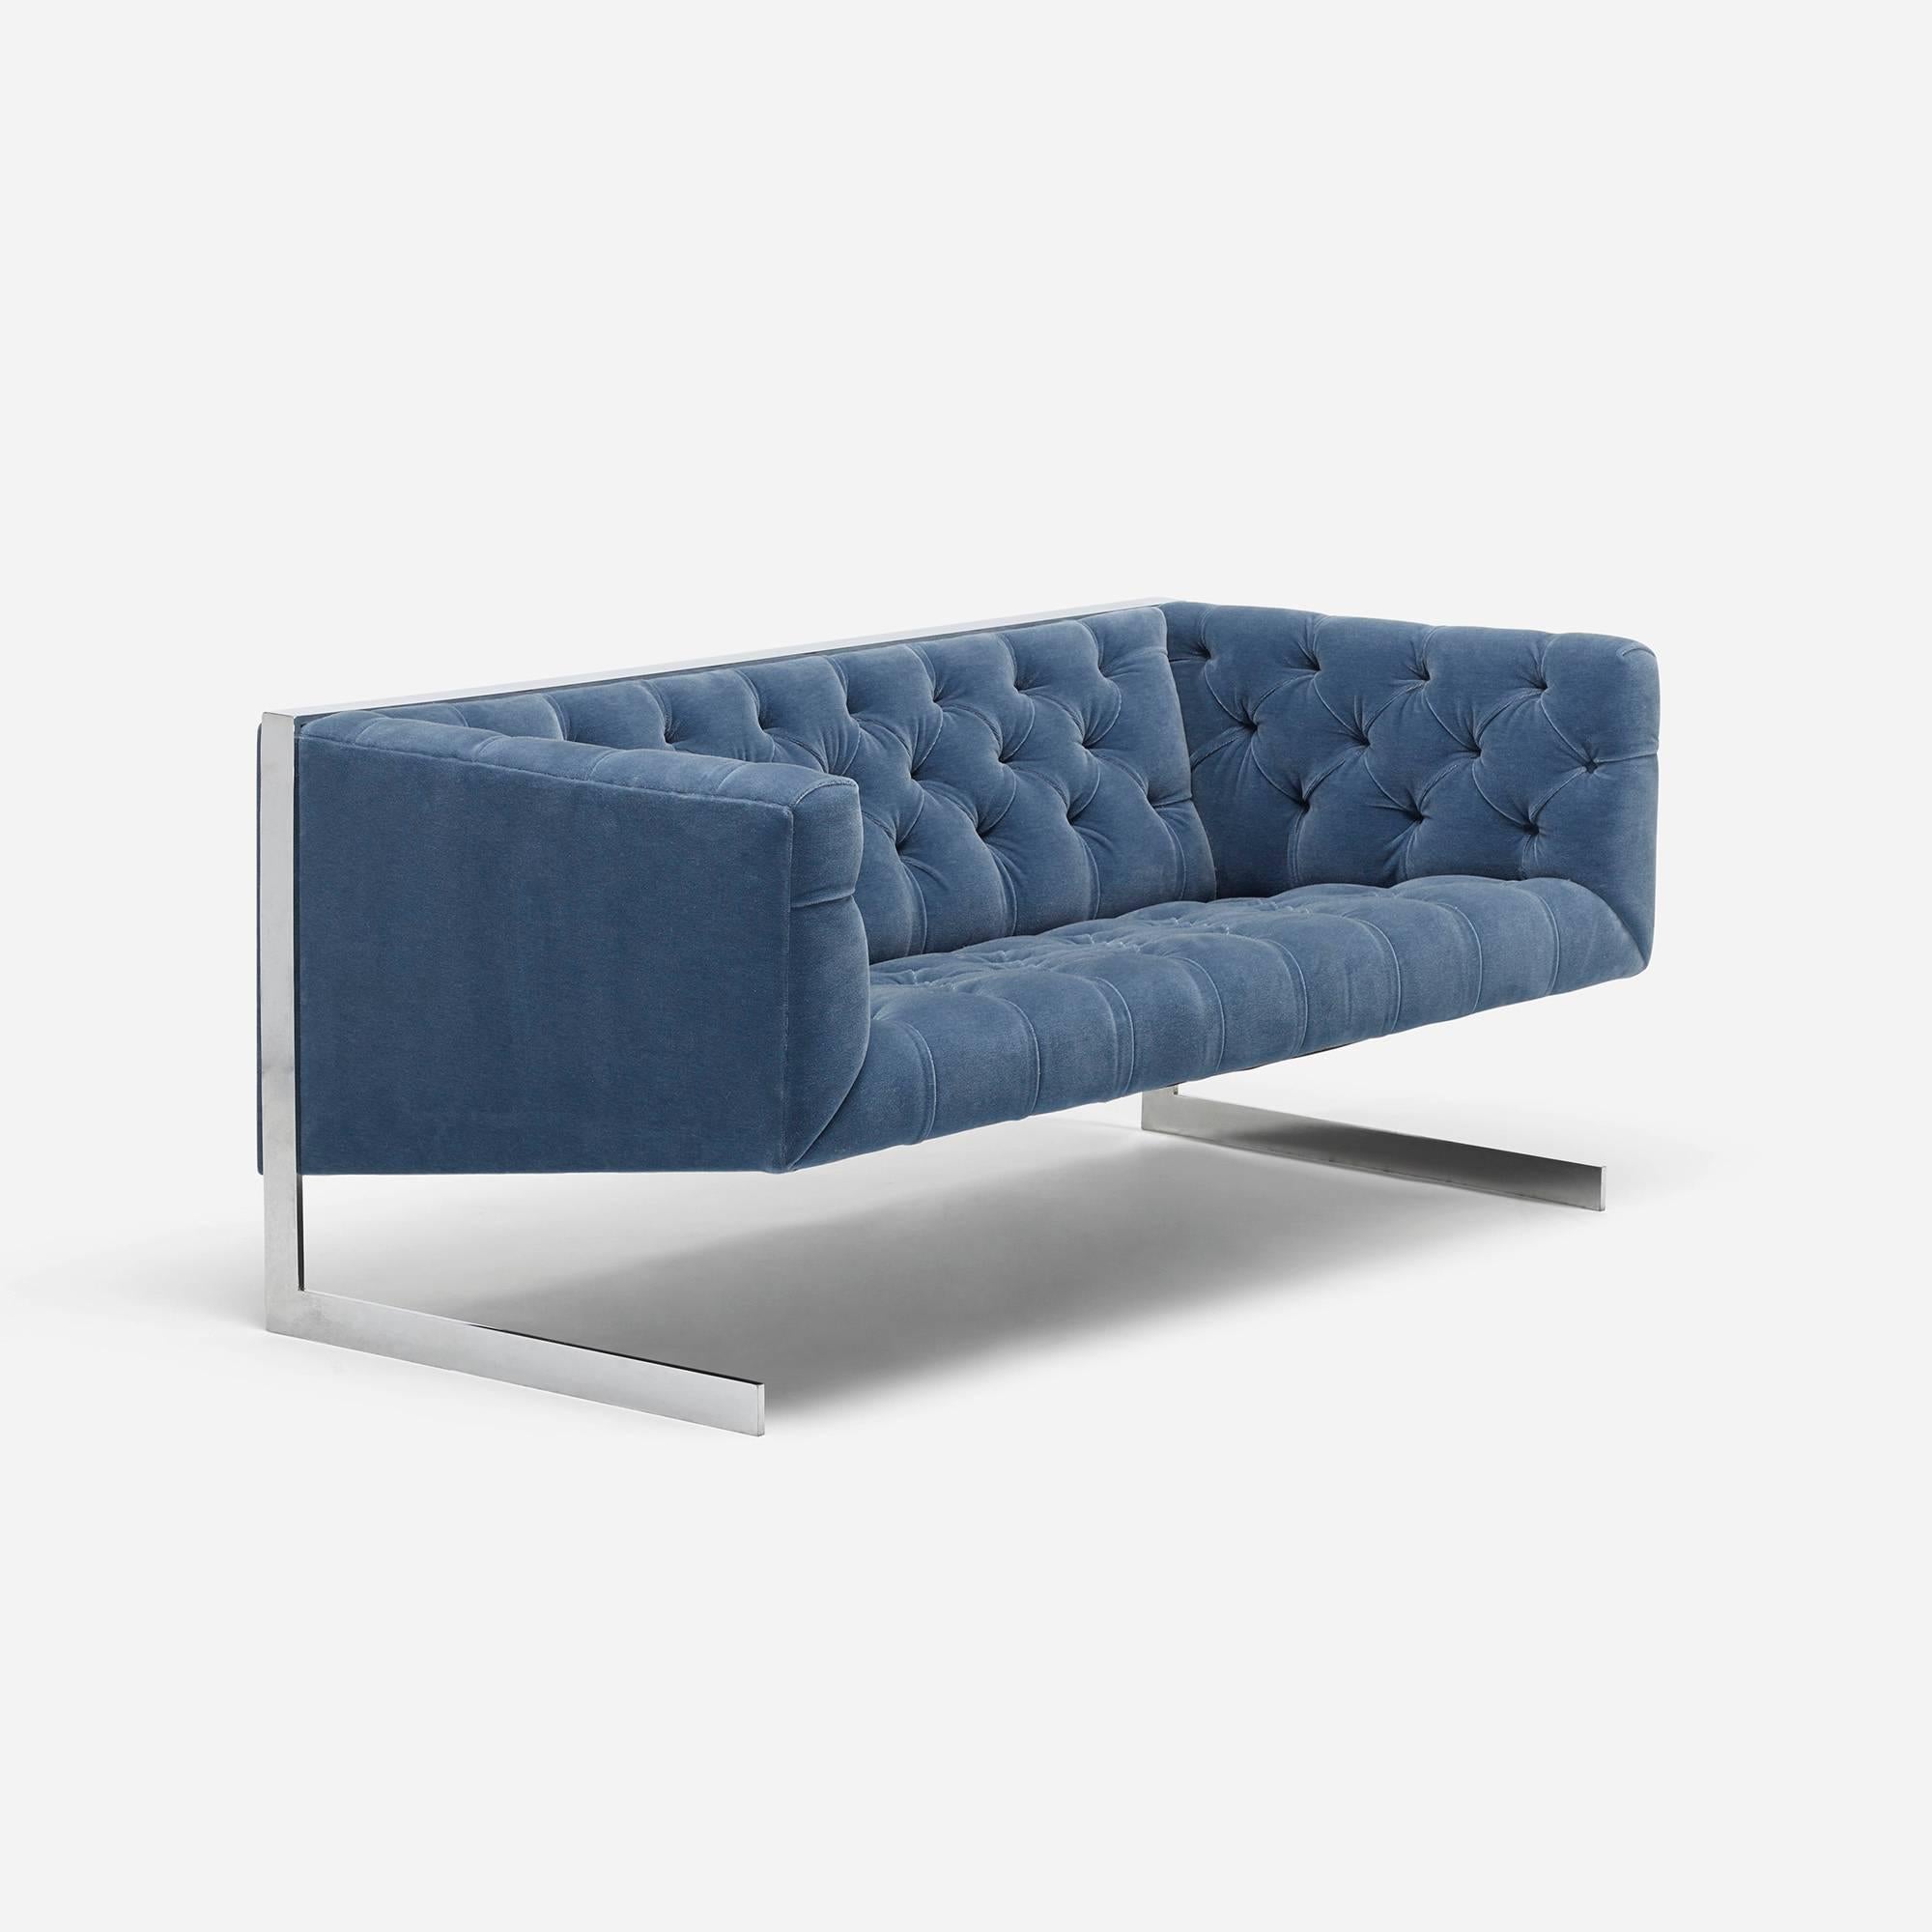 This stunning cantilevered settee by Milo Baughman has been expertly updated in a cool blue mohair fabric. With a generous seat and small footprint this eye-catching piece is perfect for small spaces.